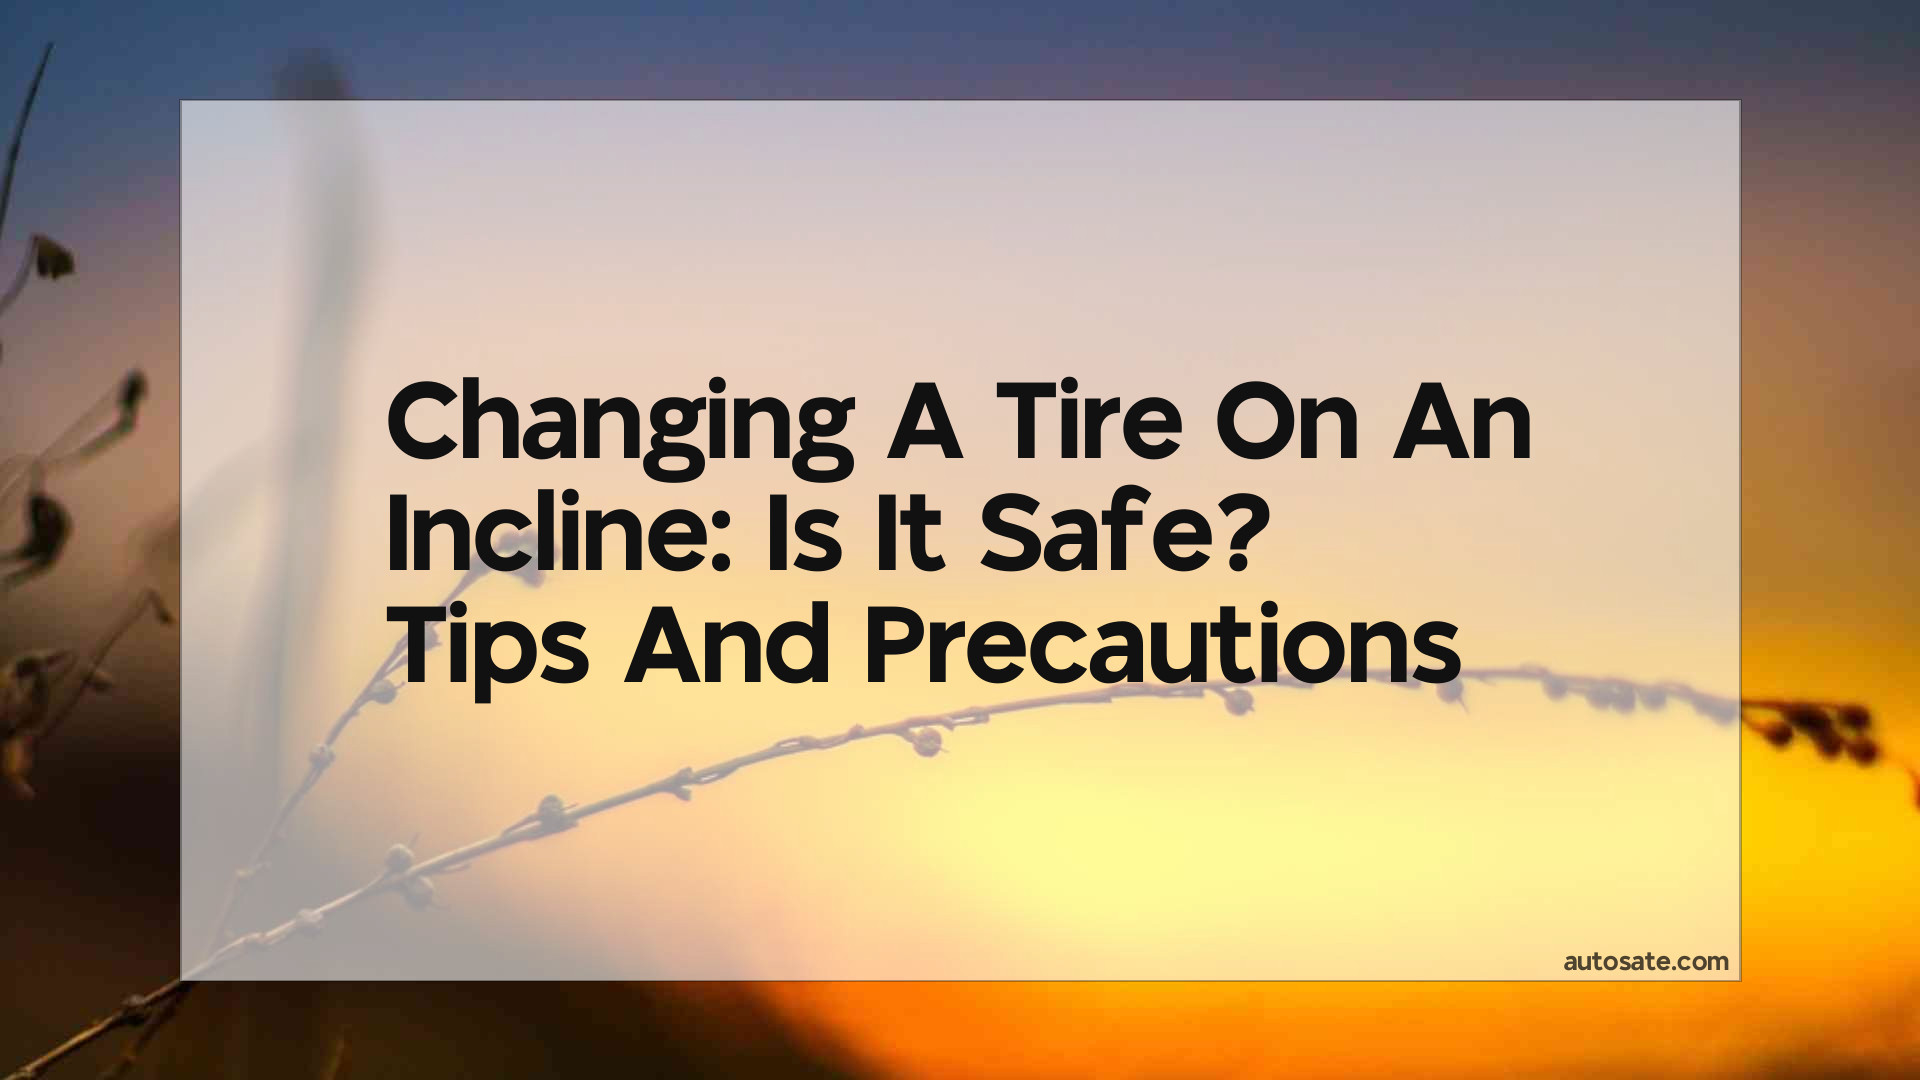 Changing A Tire On An Incline: Is It Safe? Tips And Precautions